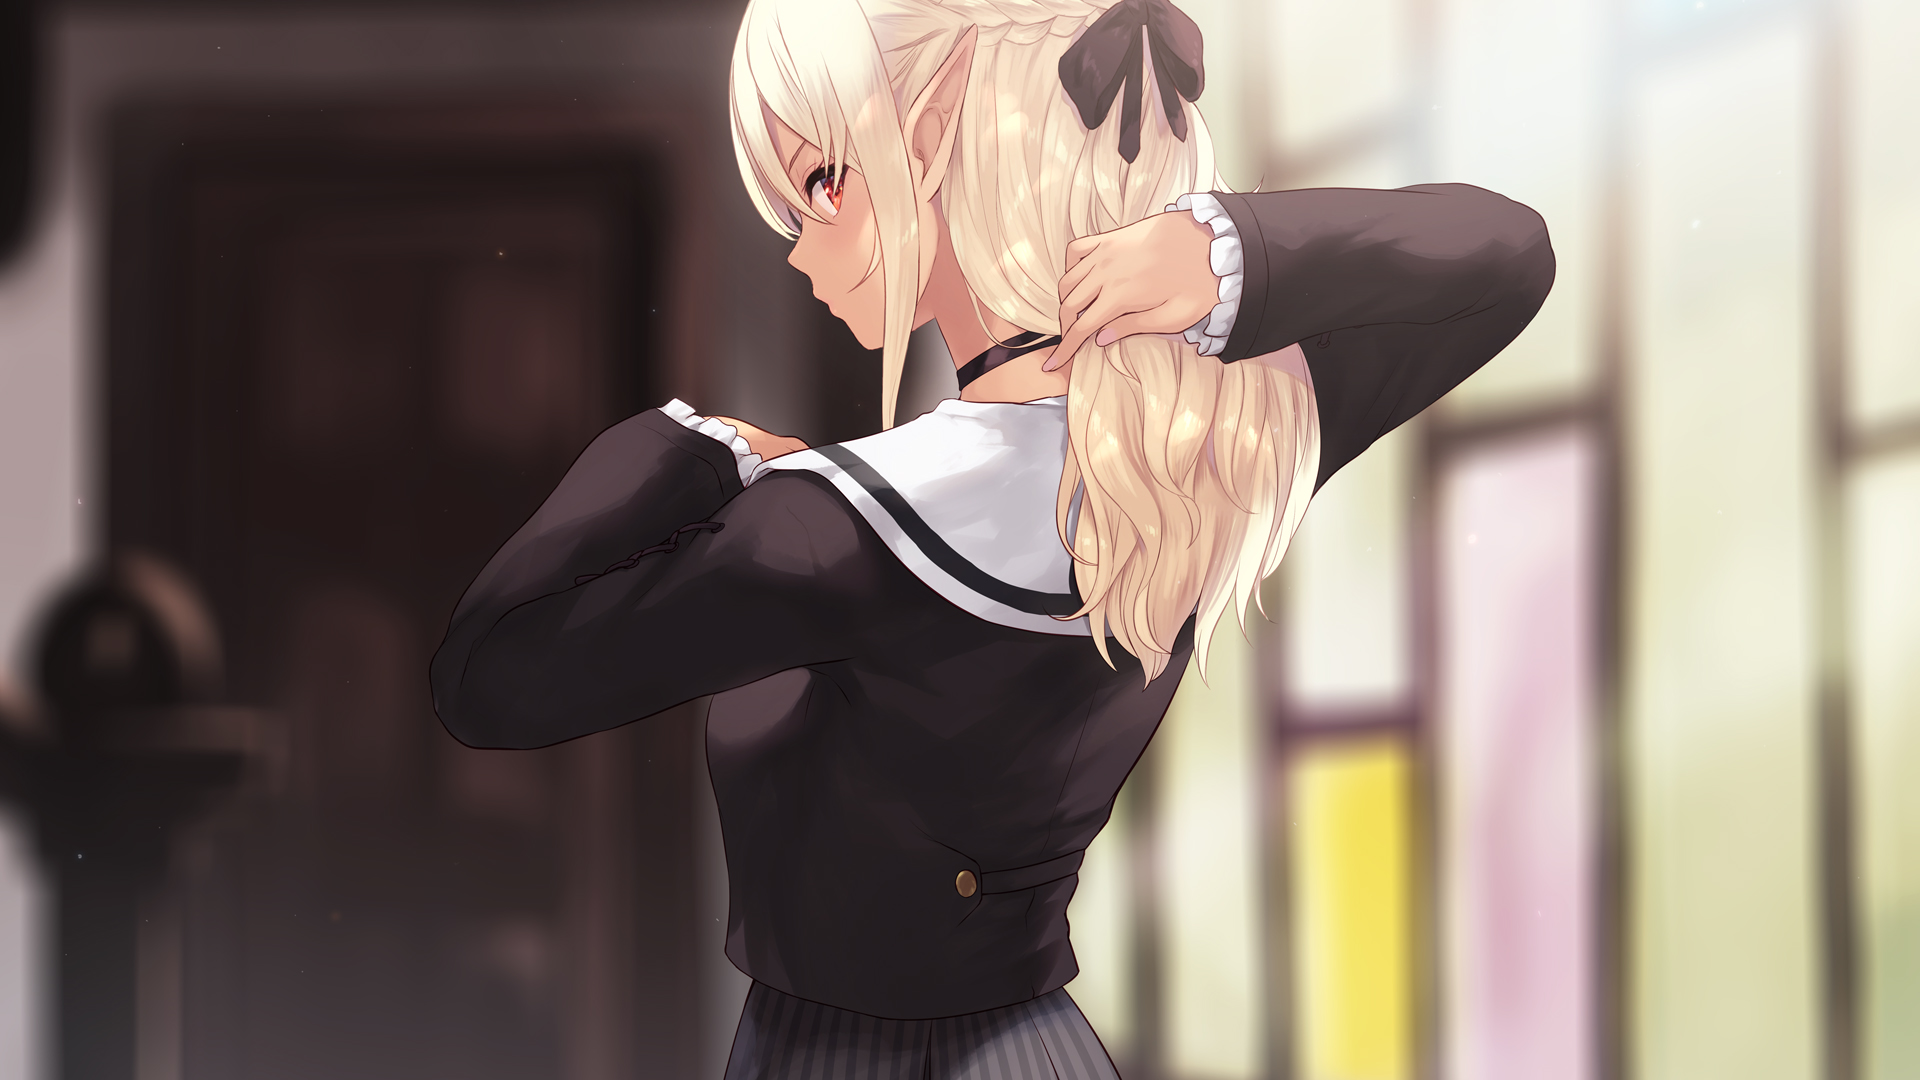 Anime 1920x1080 anime anime girls pointy ears Hololive Virtual Youtuber blonde Shiranui Flare dark elf Cait Aron dark skin red eyes long hair women standing Pixiv rear view looking over shoulder